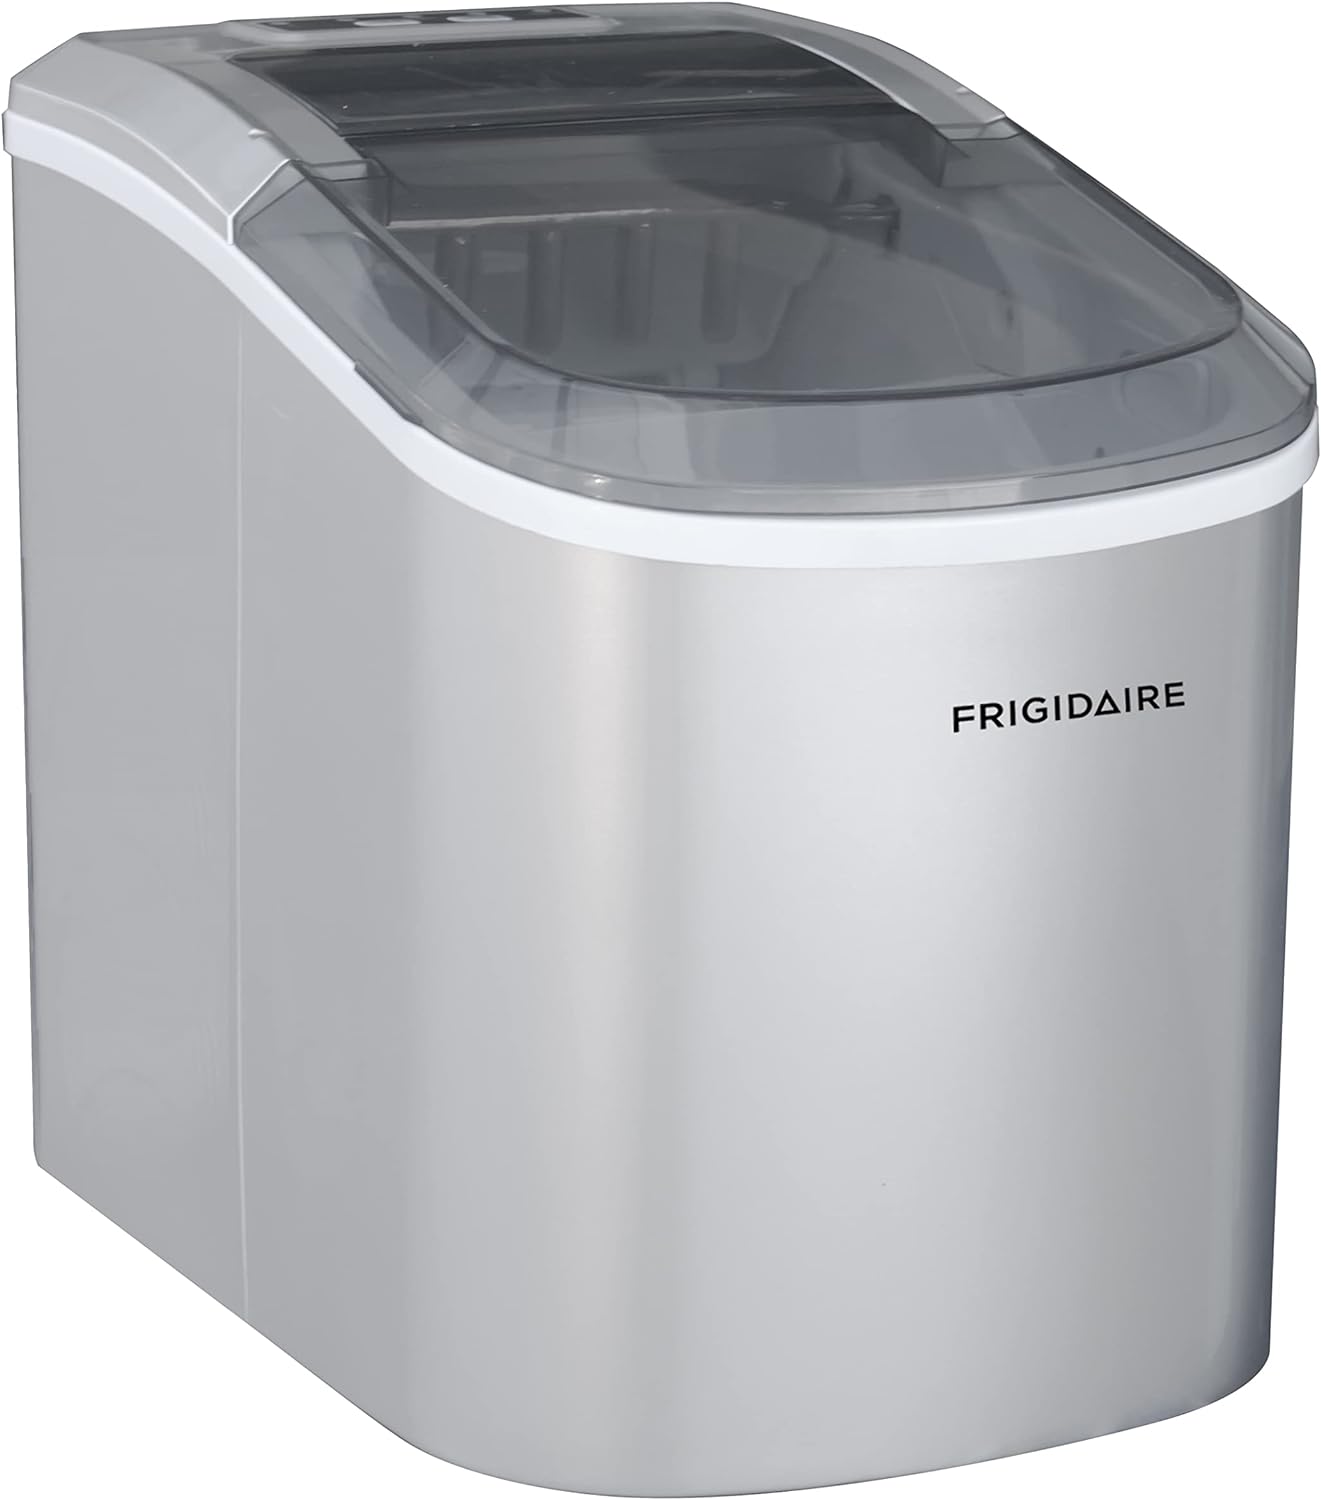 FRIGIDAIRE EFIC189-Silver Compact Ice Maker Review